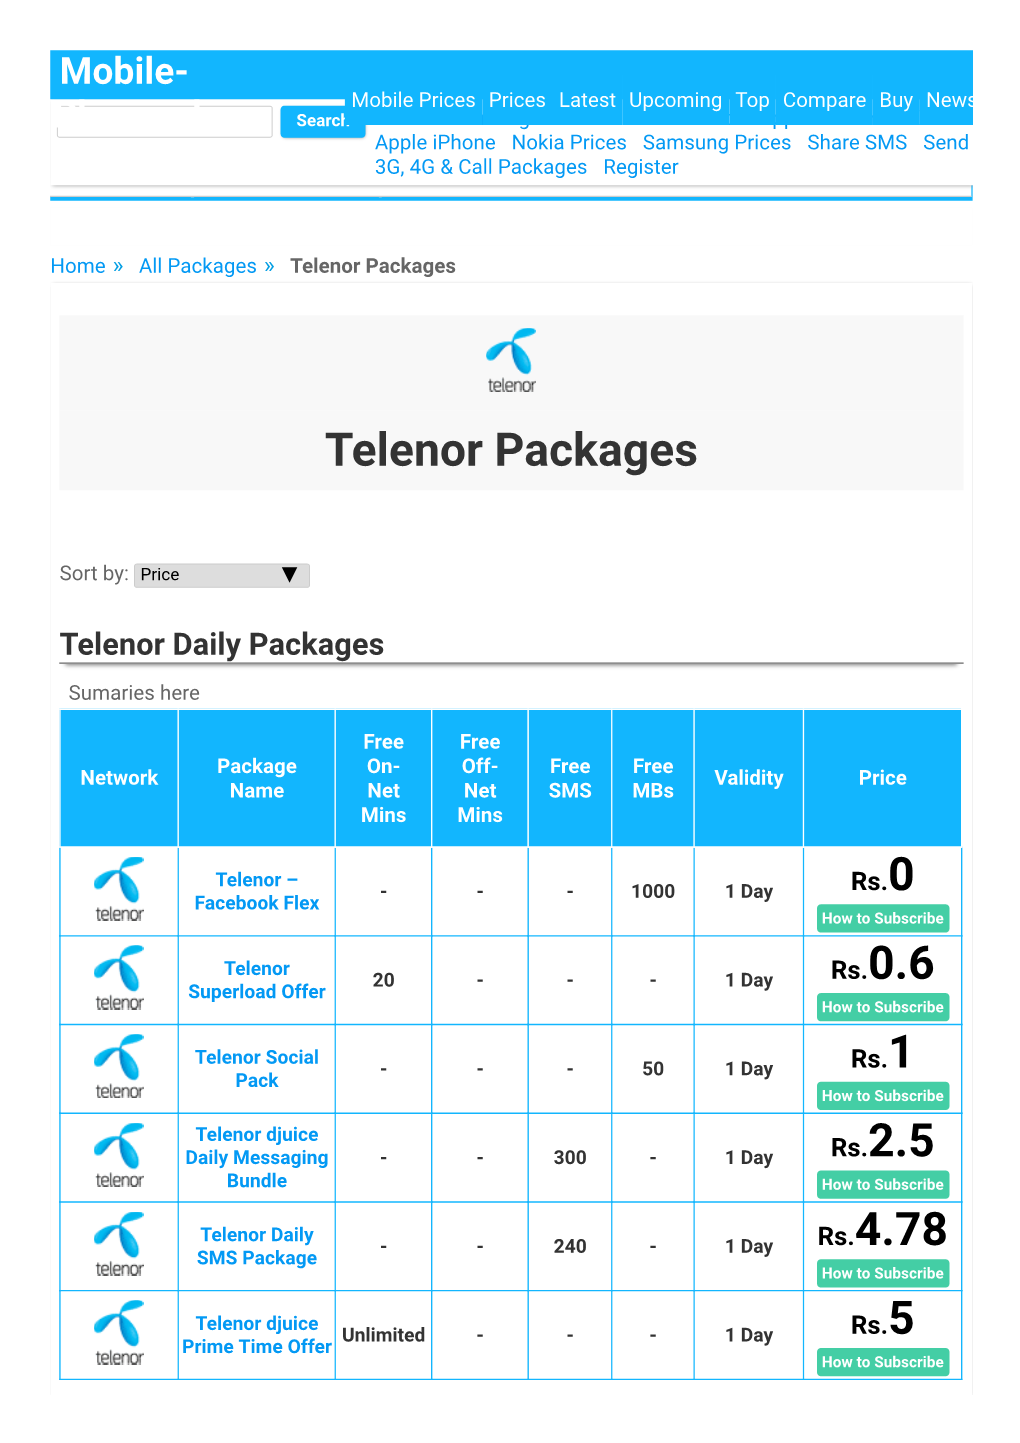 Telenor Packages Rs.4.78